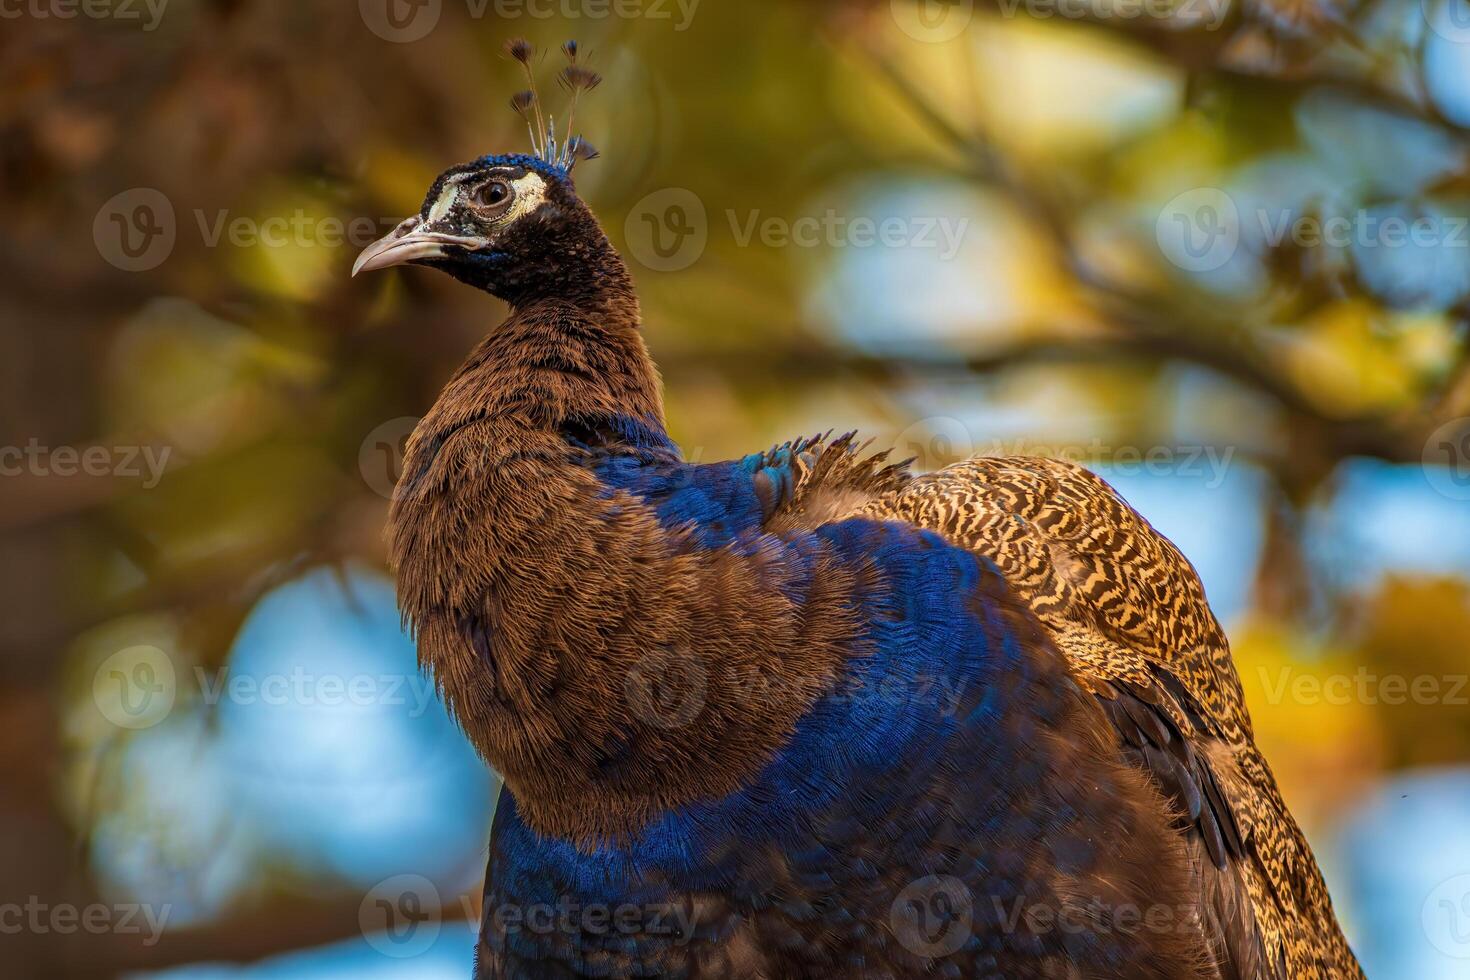 a colorful male blue peacock photo